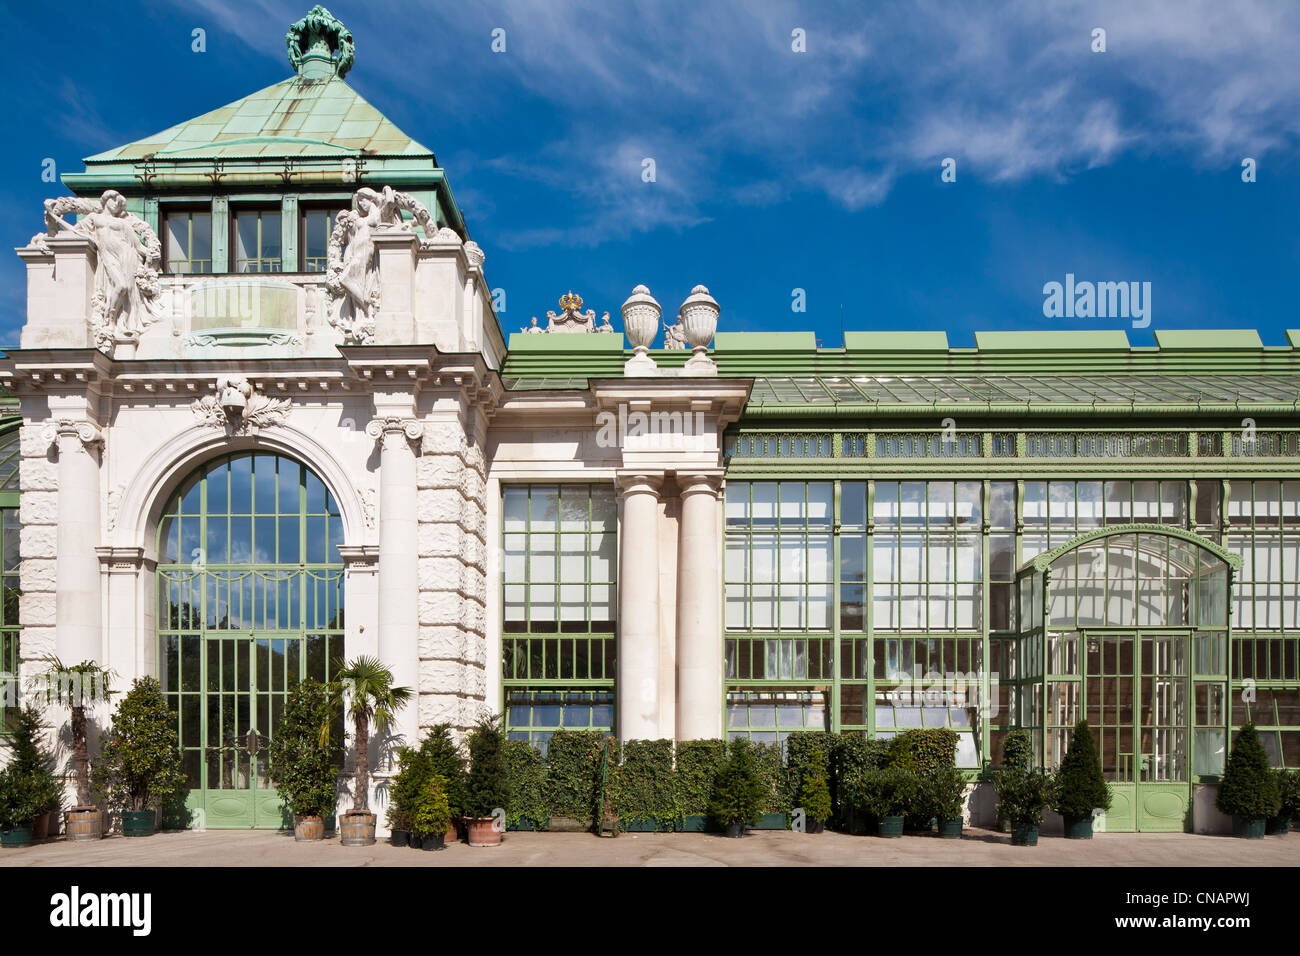 Austria, Vienna, historic center listed as World Heritage by UNESCO, Hofburg Palace, Burggarten, Palmenhaus, imperial Stock Photo